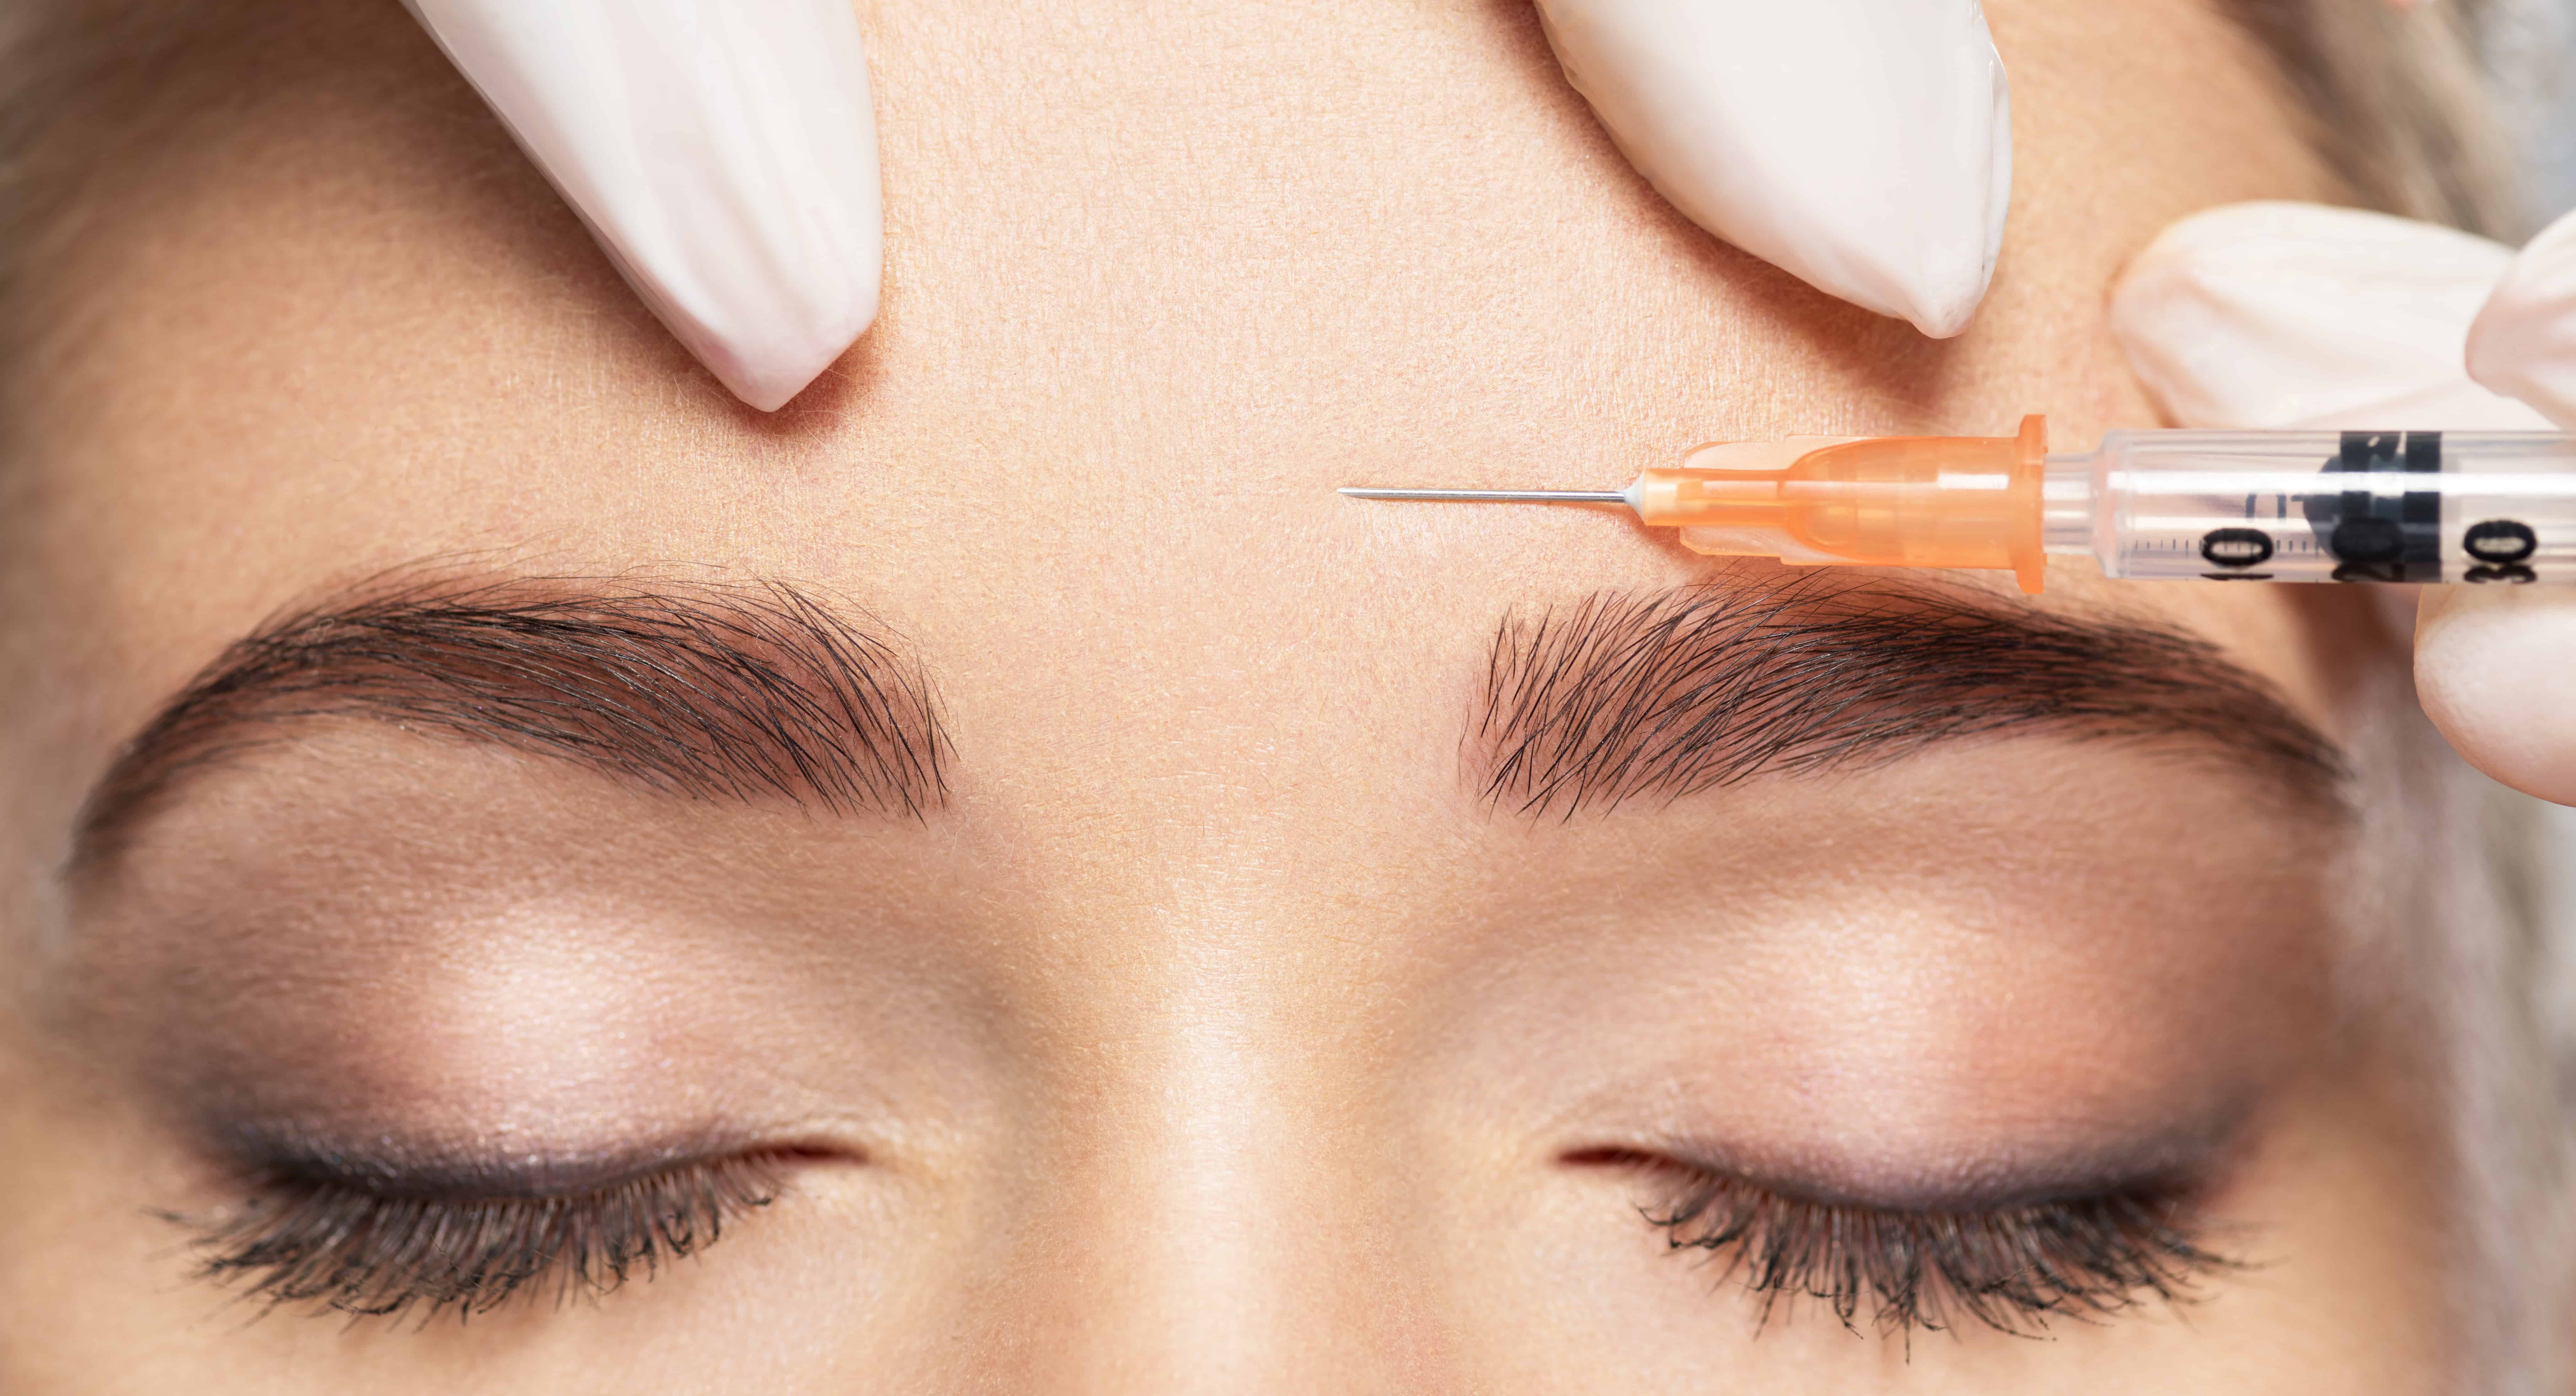 6 Things You Should Know About Botox